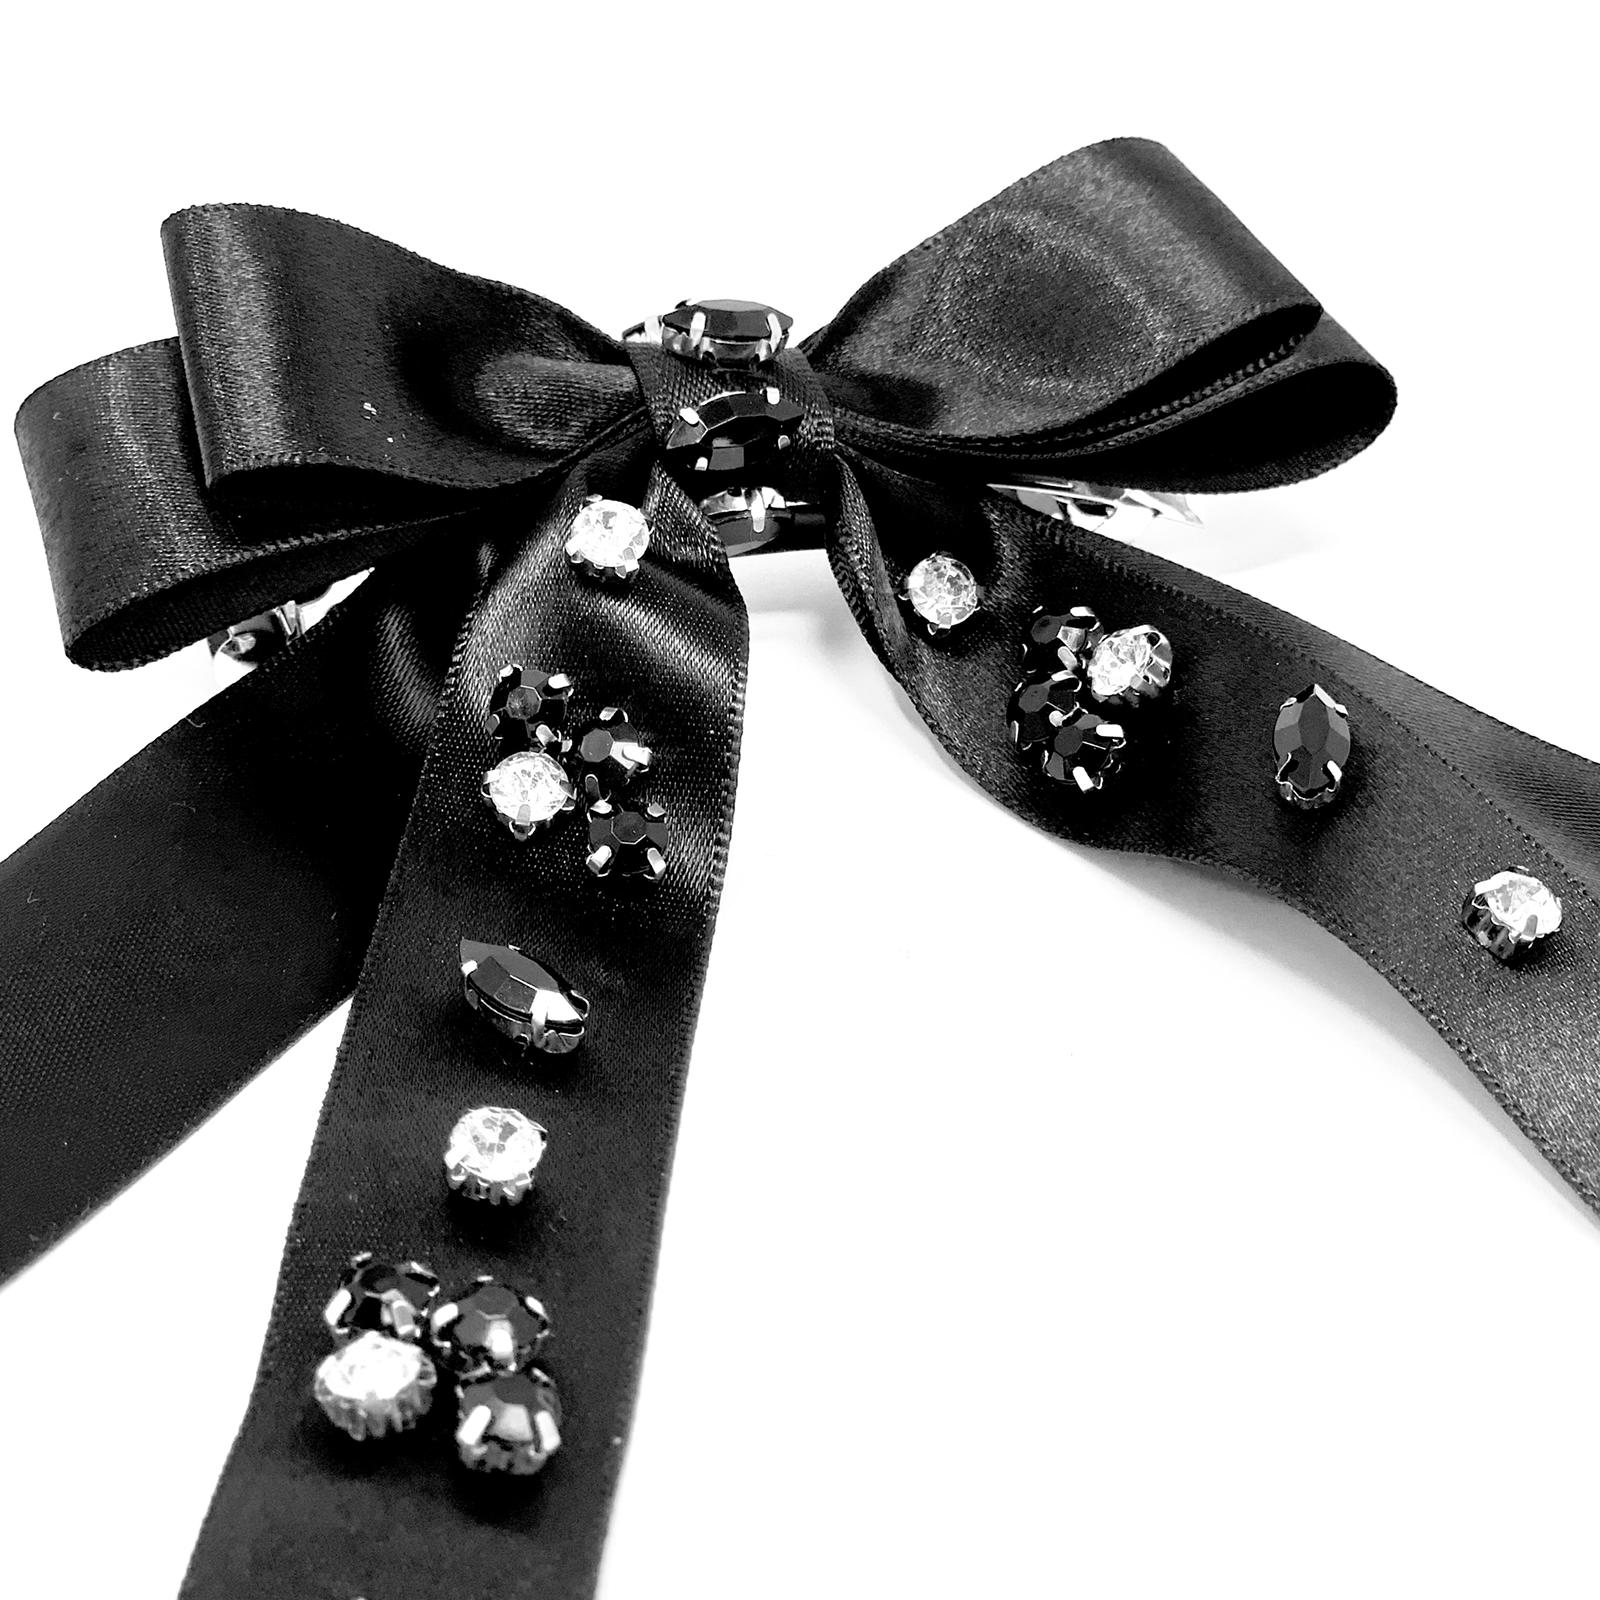 Black hair clip with a bow designed with crystals